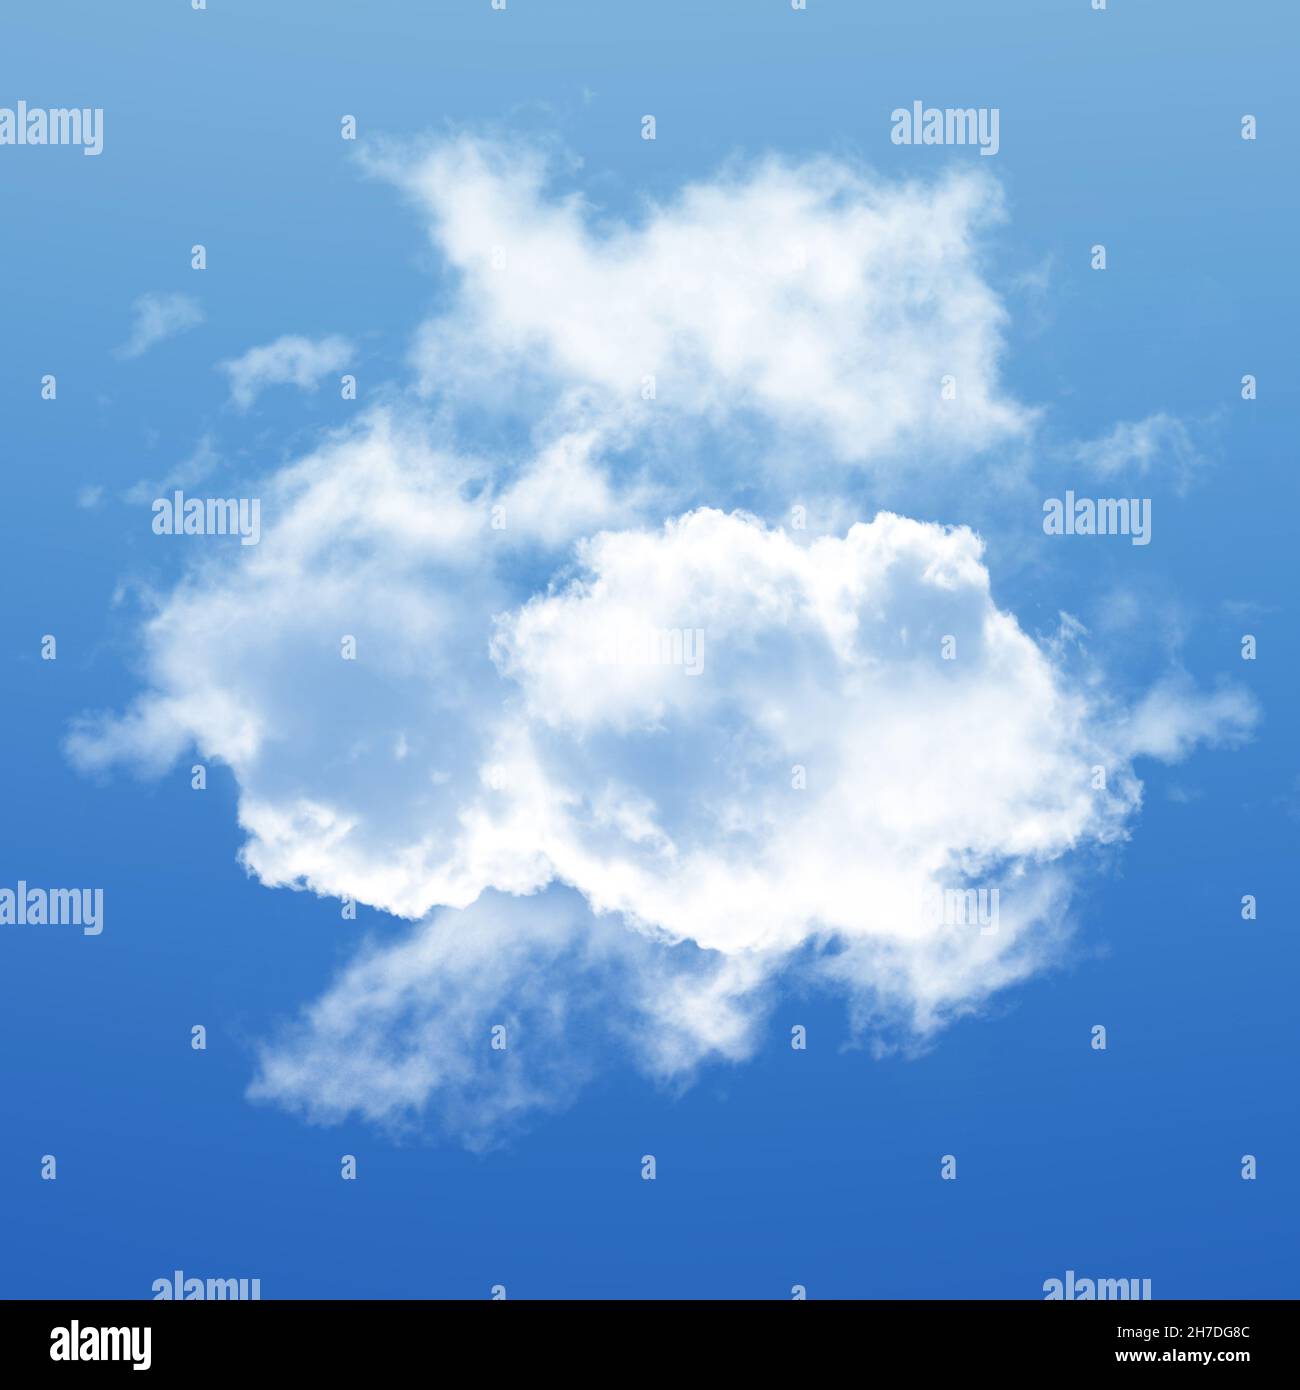 White cloud isolated over blue sky background 3D illustration, realistic cloud shape rendering Stock Photo